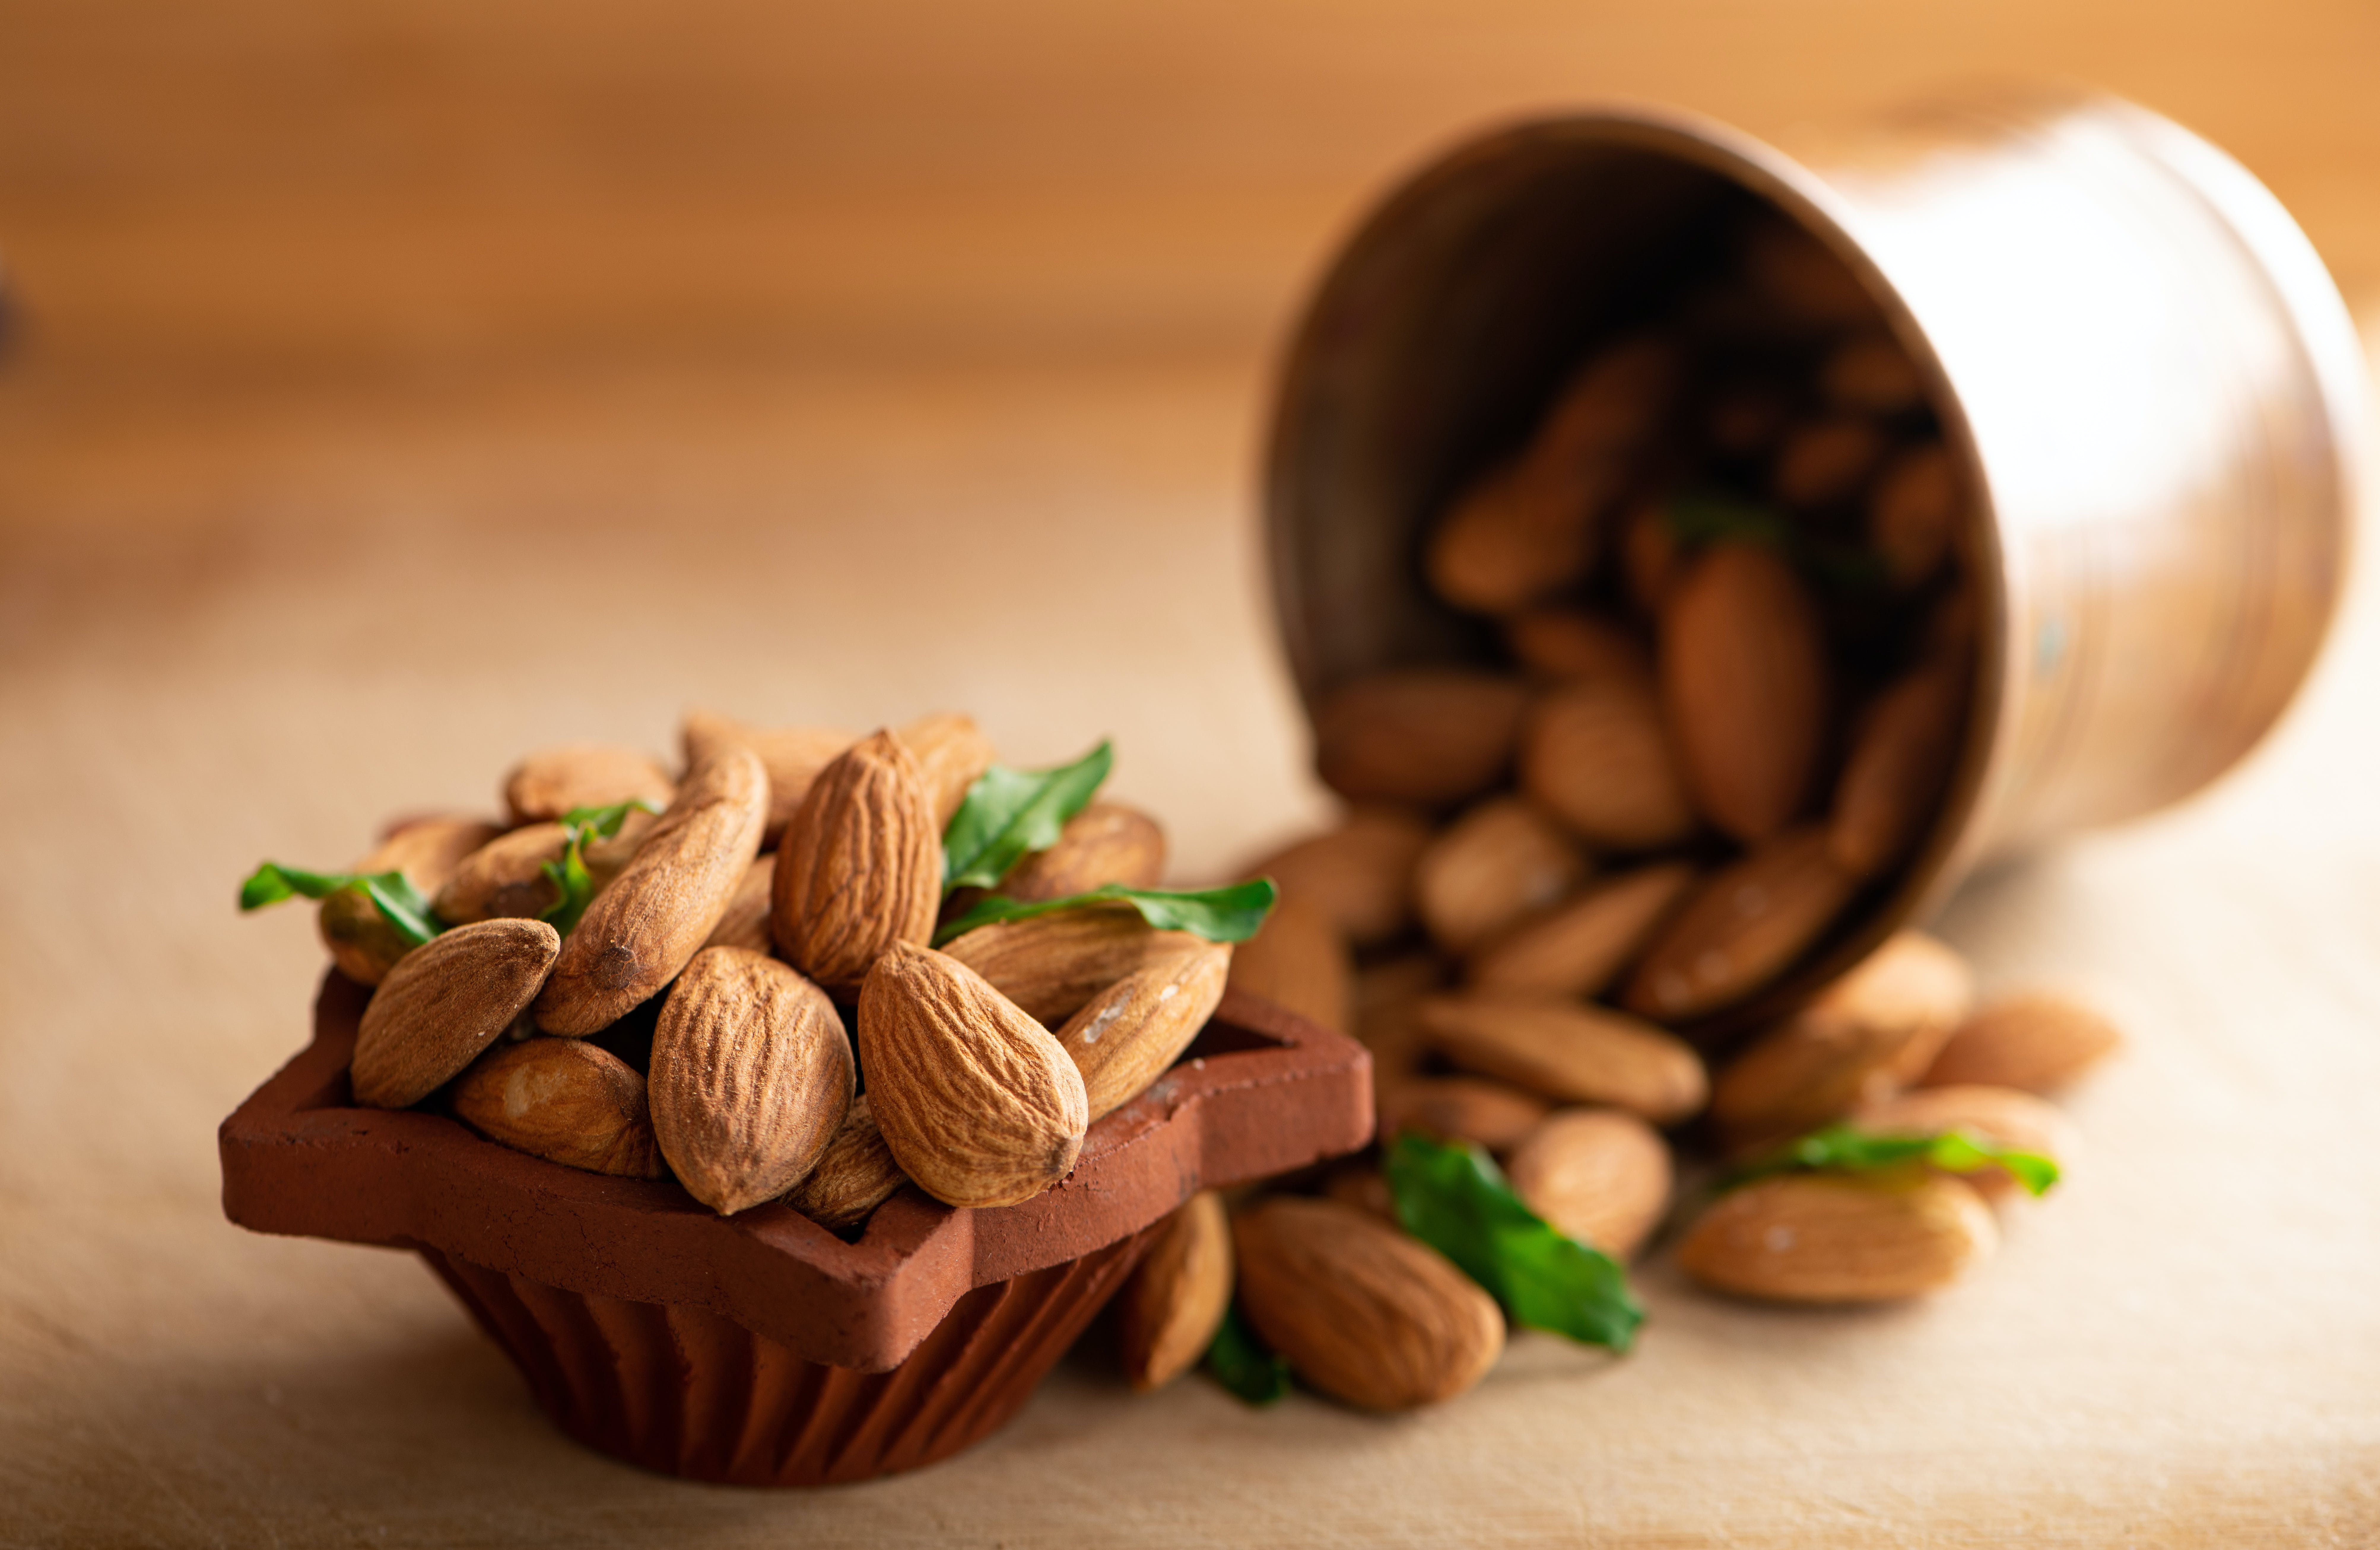 Eat a Handful of Almonds for Slim Waist and Lean Legs